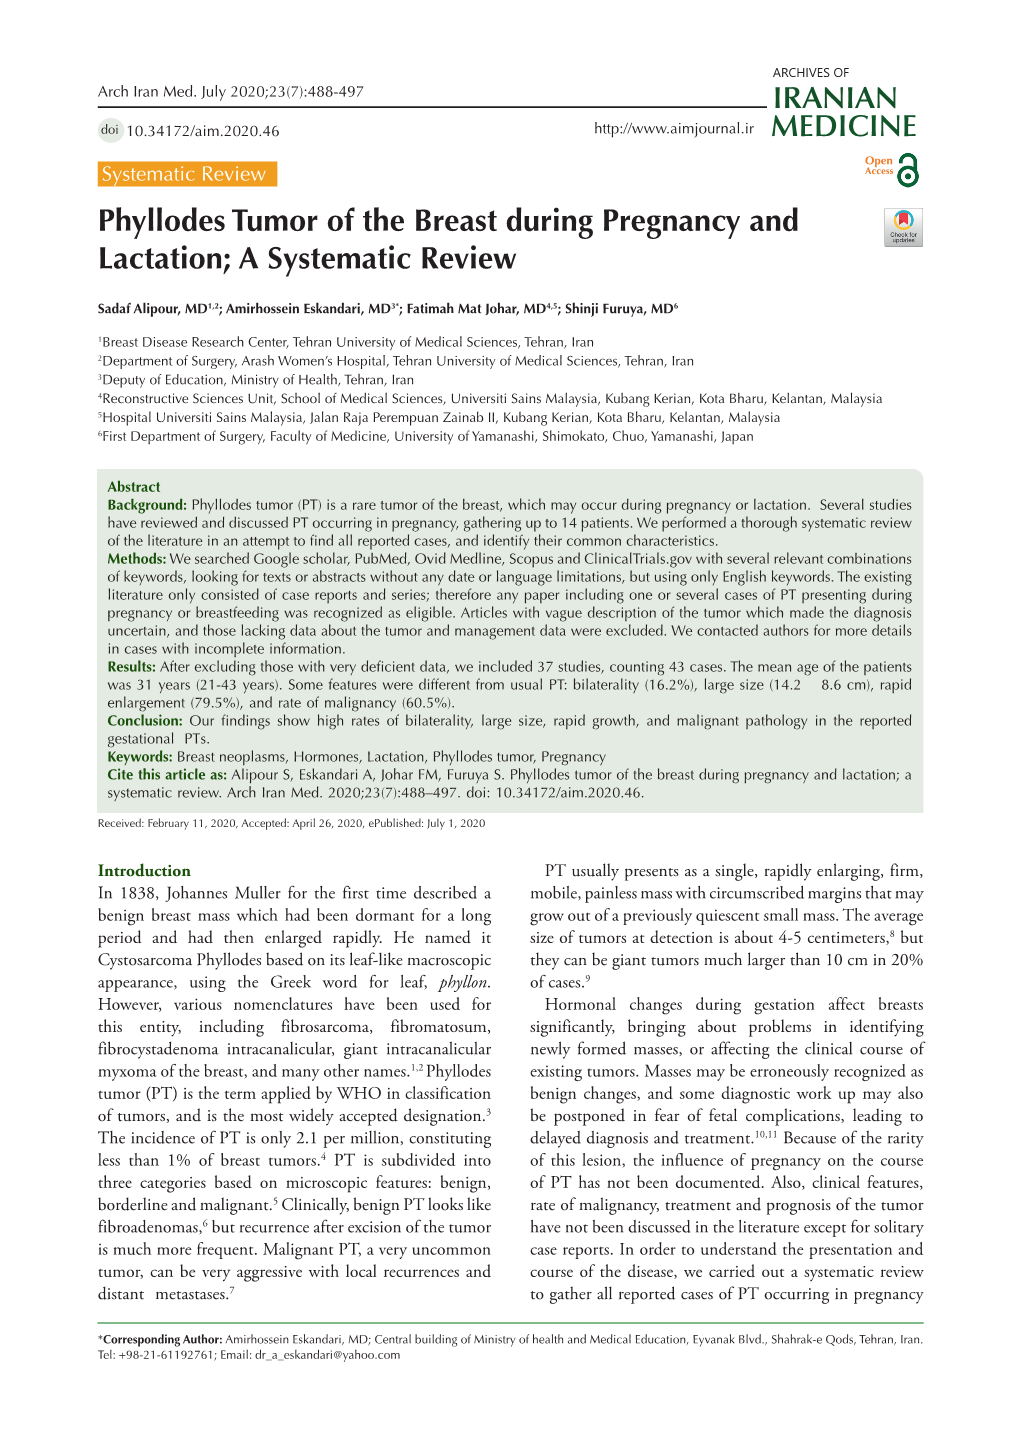 Phyllodes Tumor of the Breast During Pregnancy and Lactation; a Systematic Review